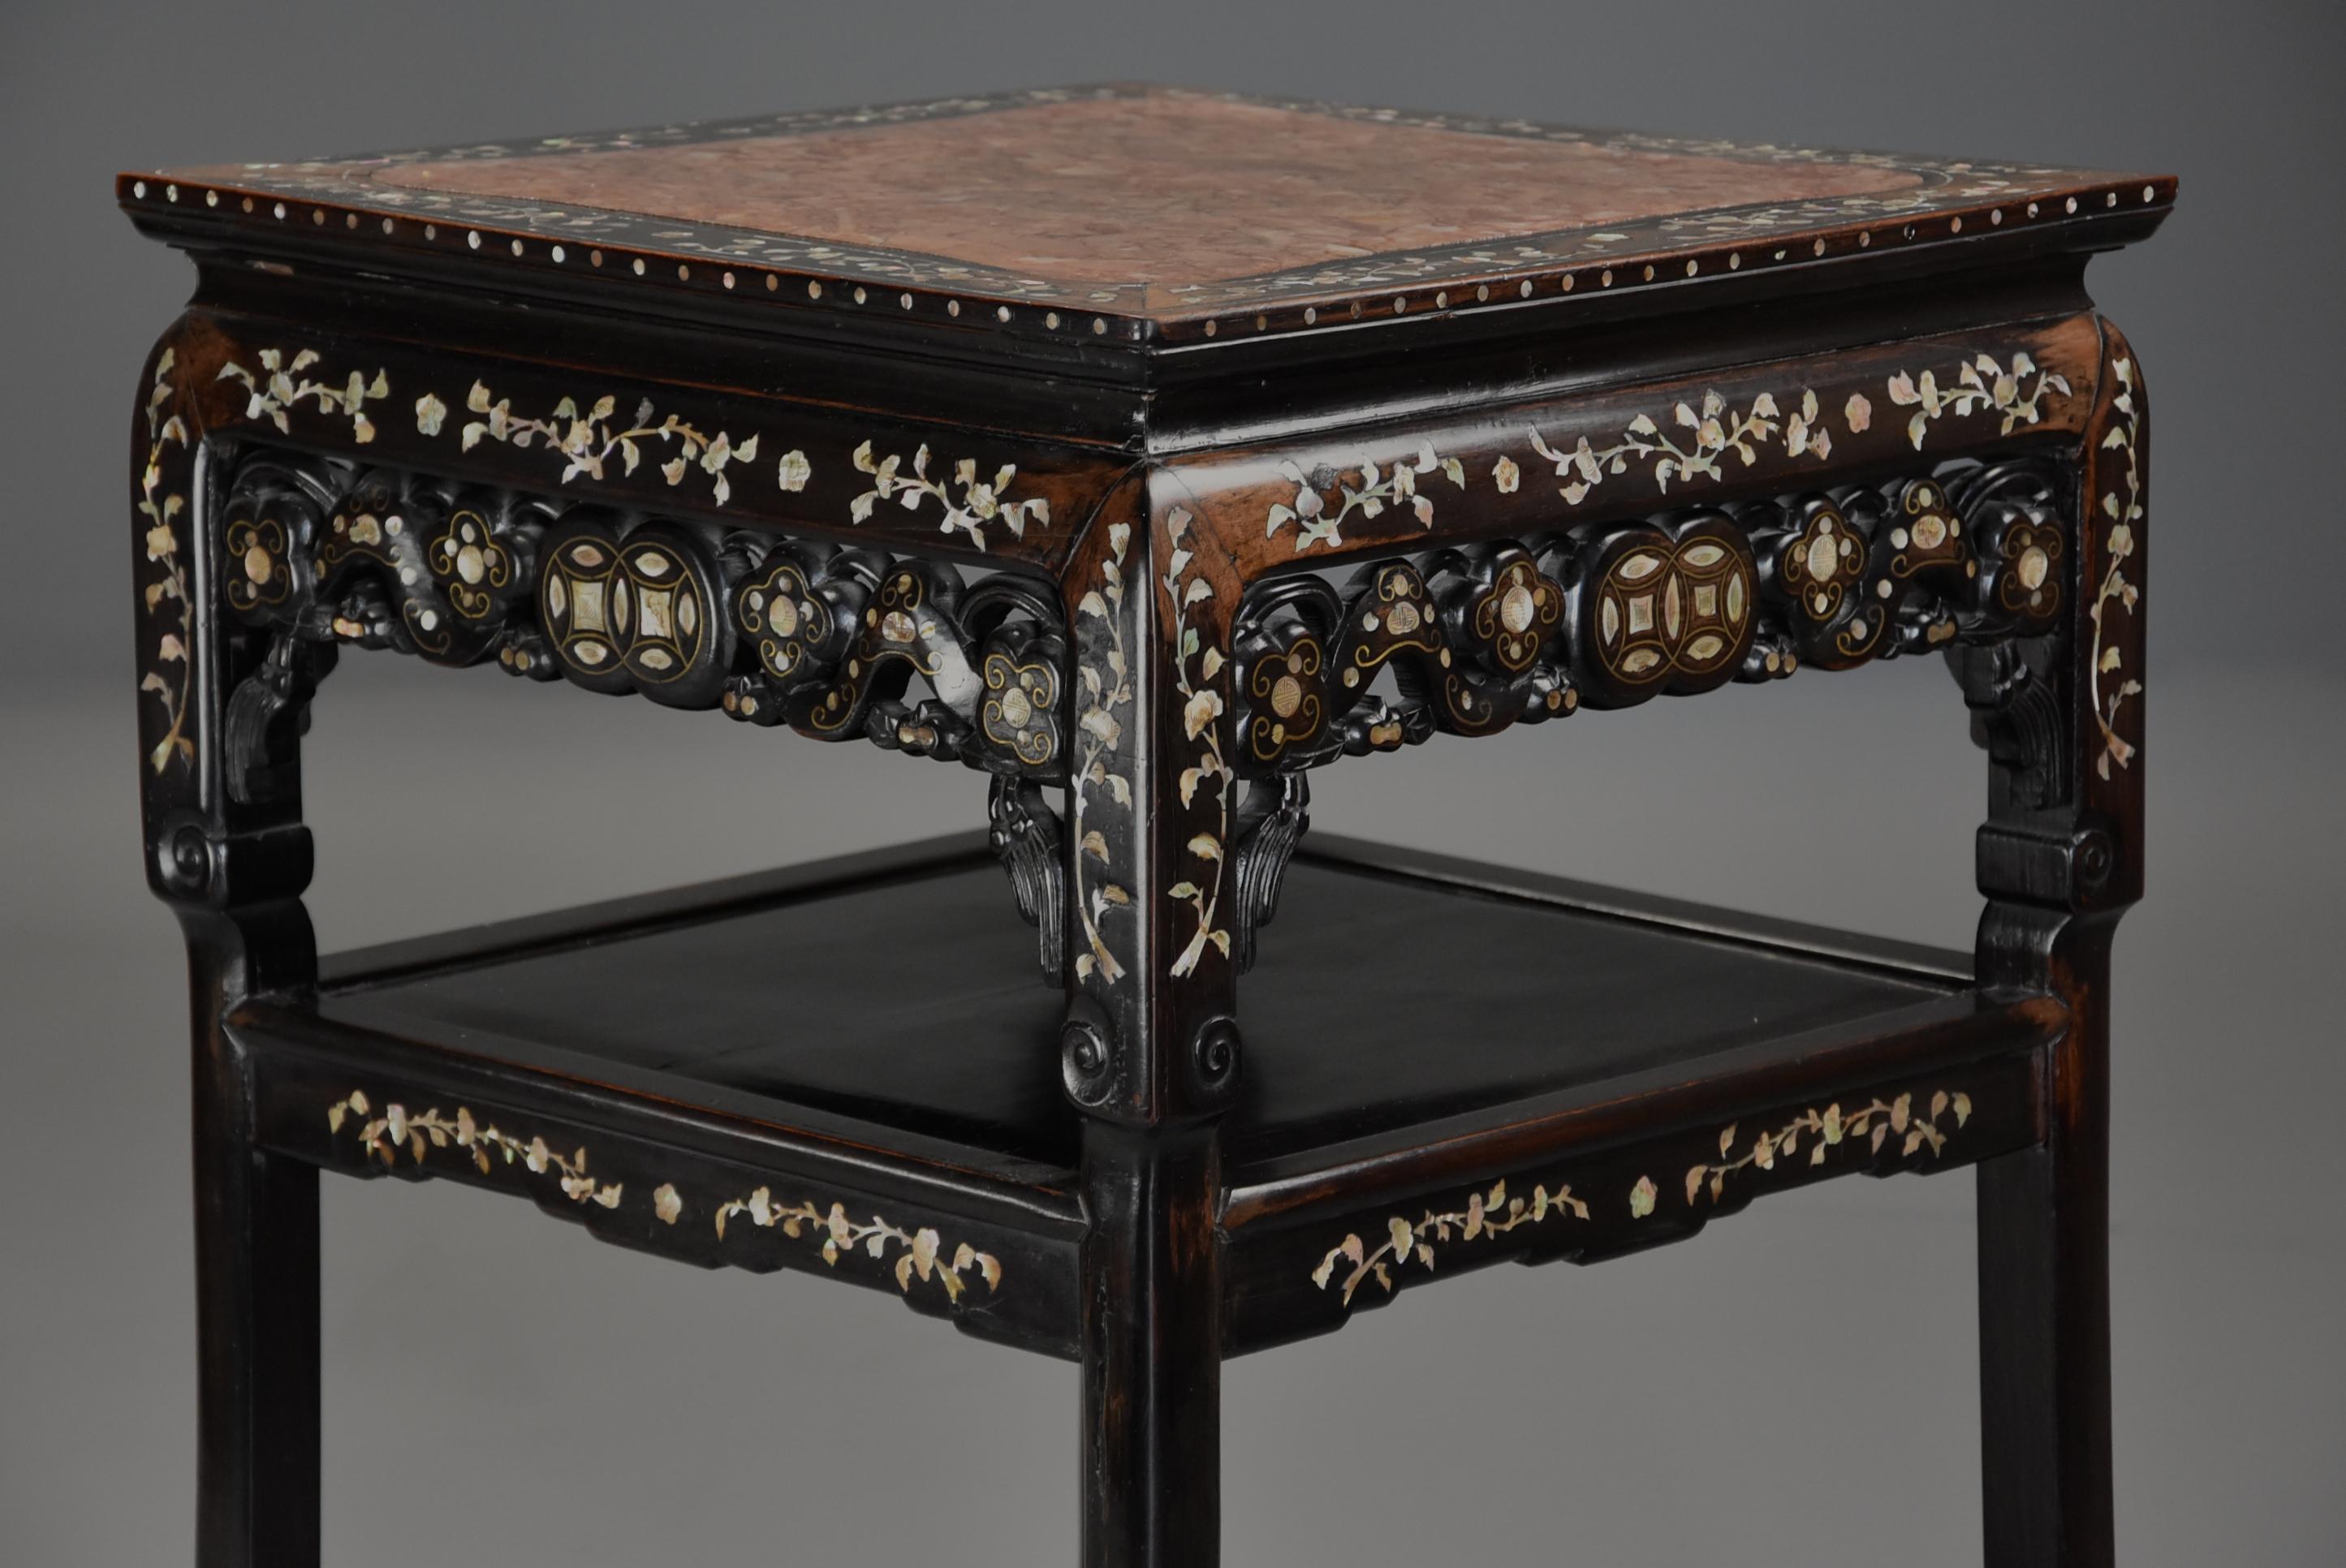 19th Century Highly Decorative Chinese Hardwood and Mother of Pearl Square Pot Stand